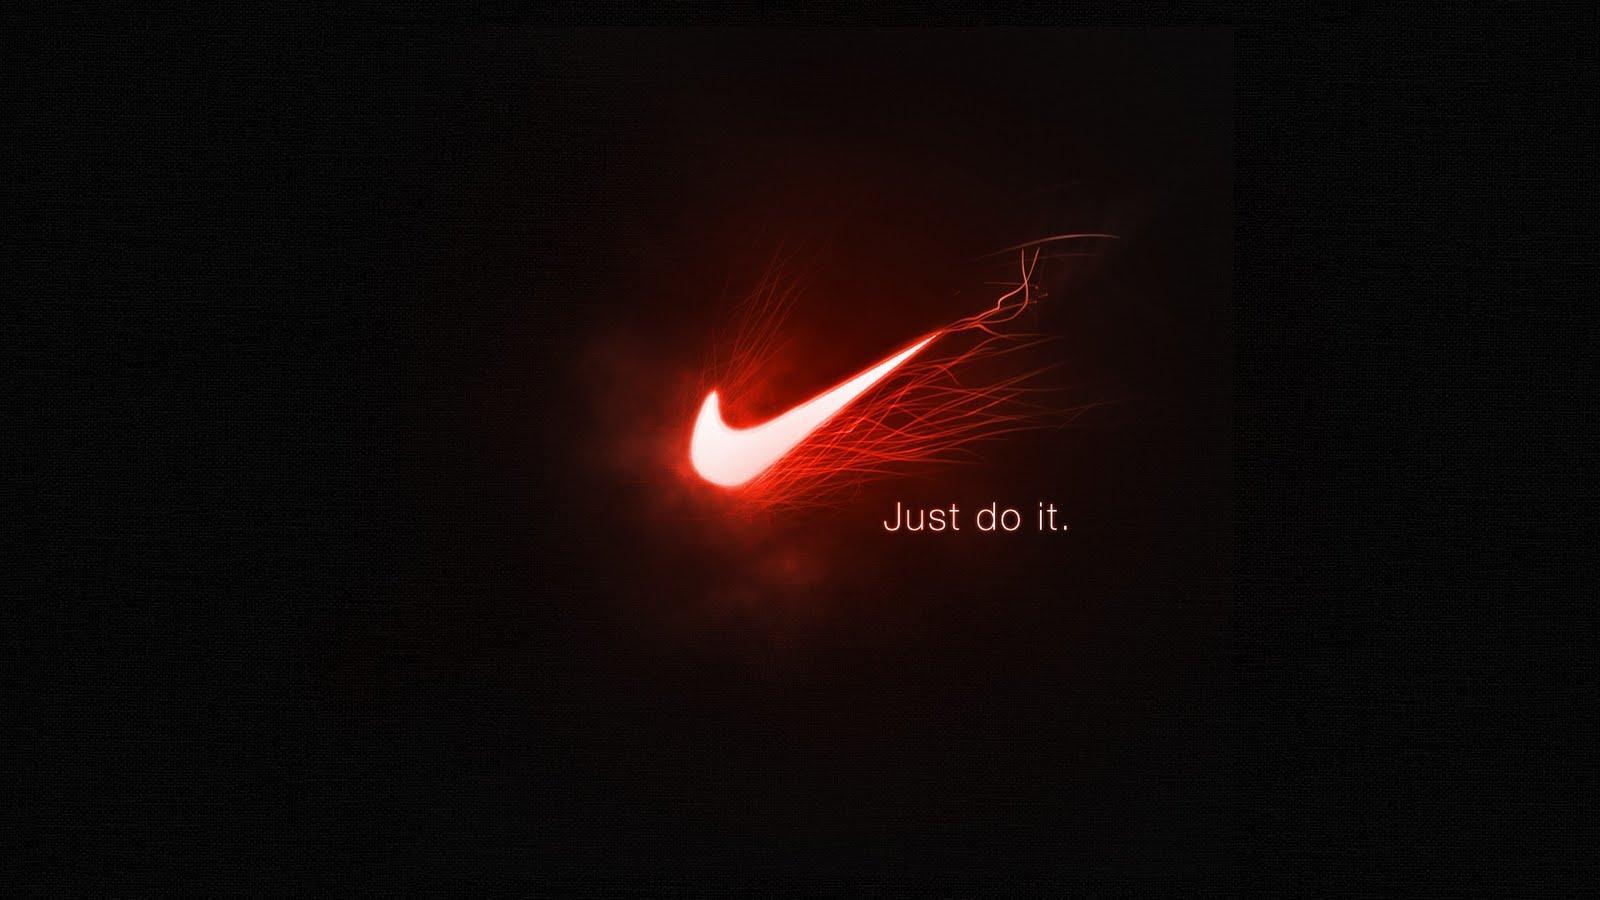 Nike For Laptop Wallpapers